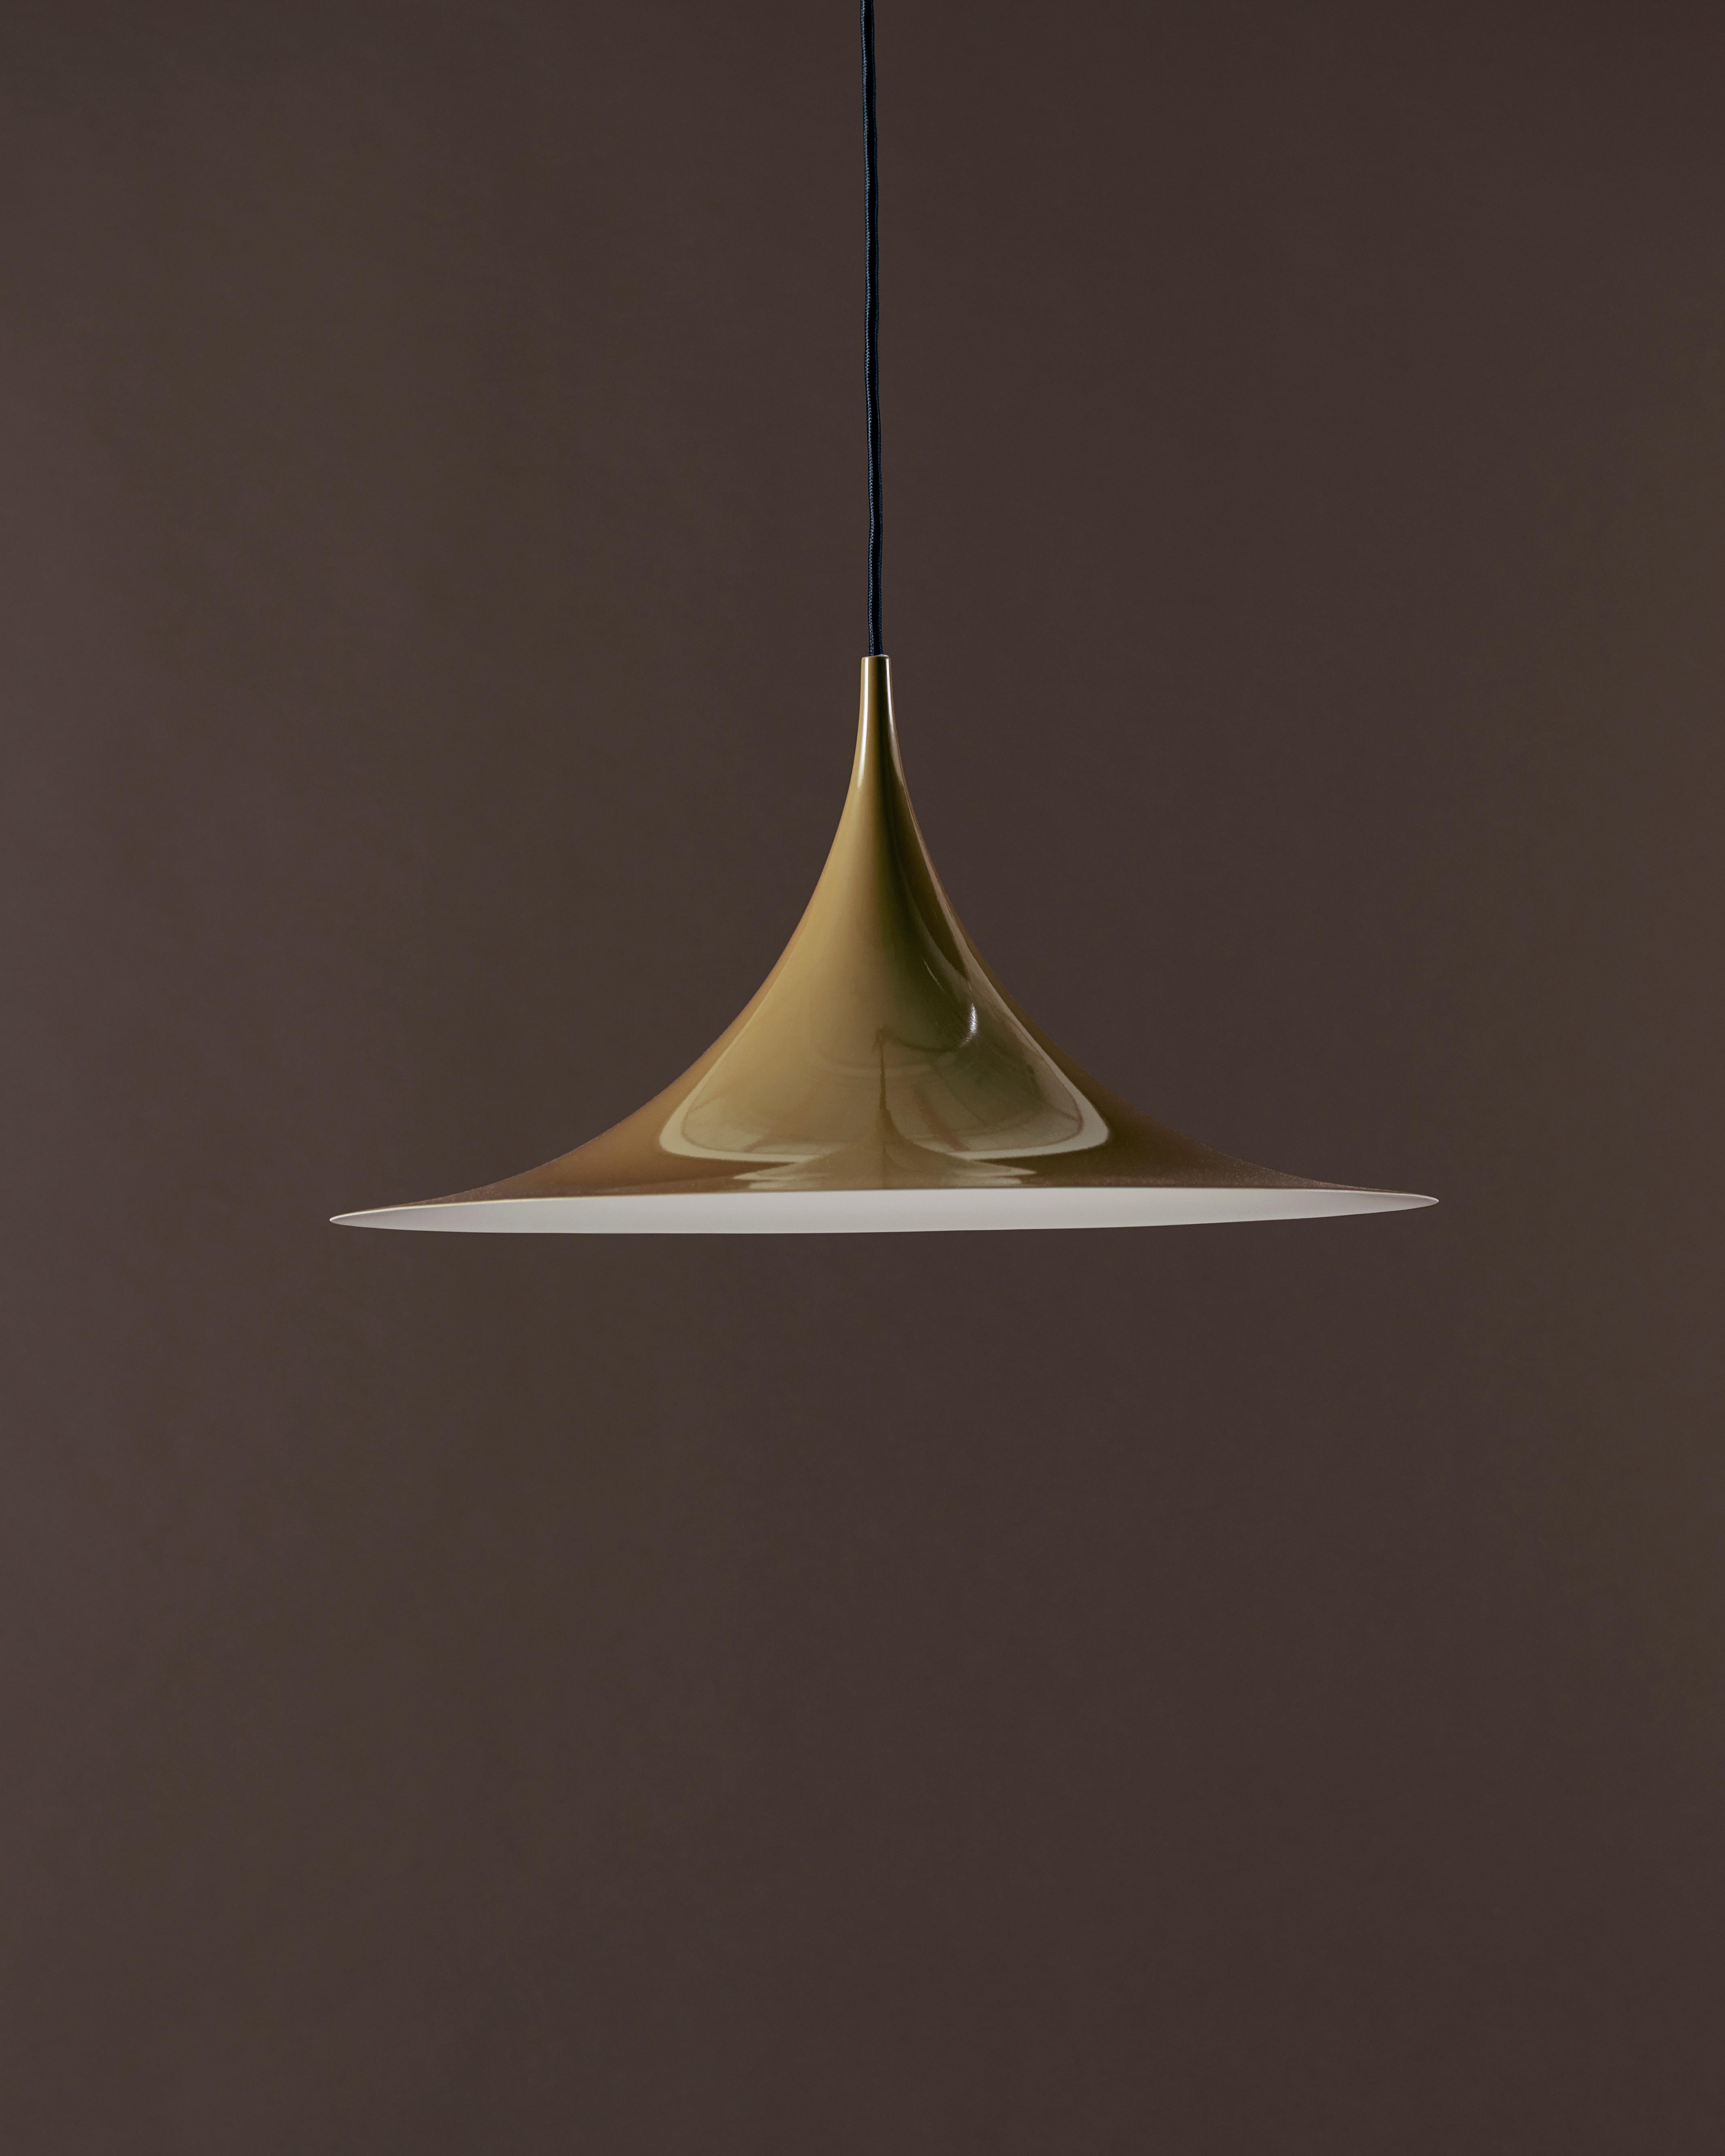 Bonderup & Thorup 'Semi' Pendant in Fennel Seed For Sale 4